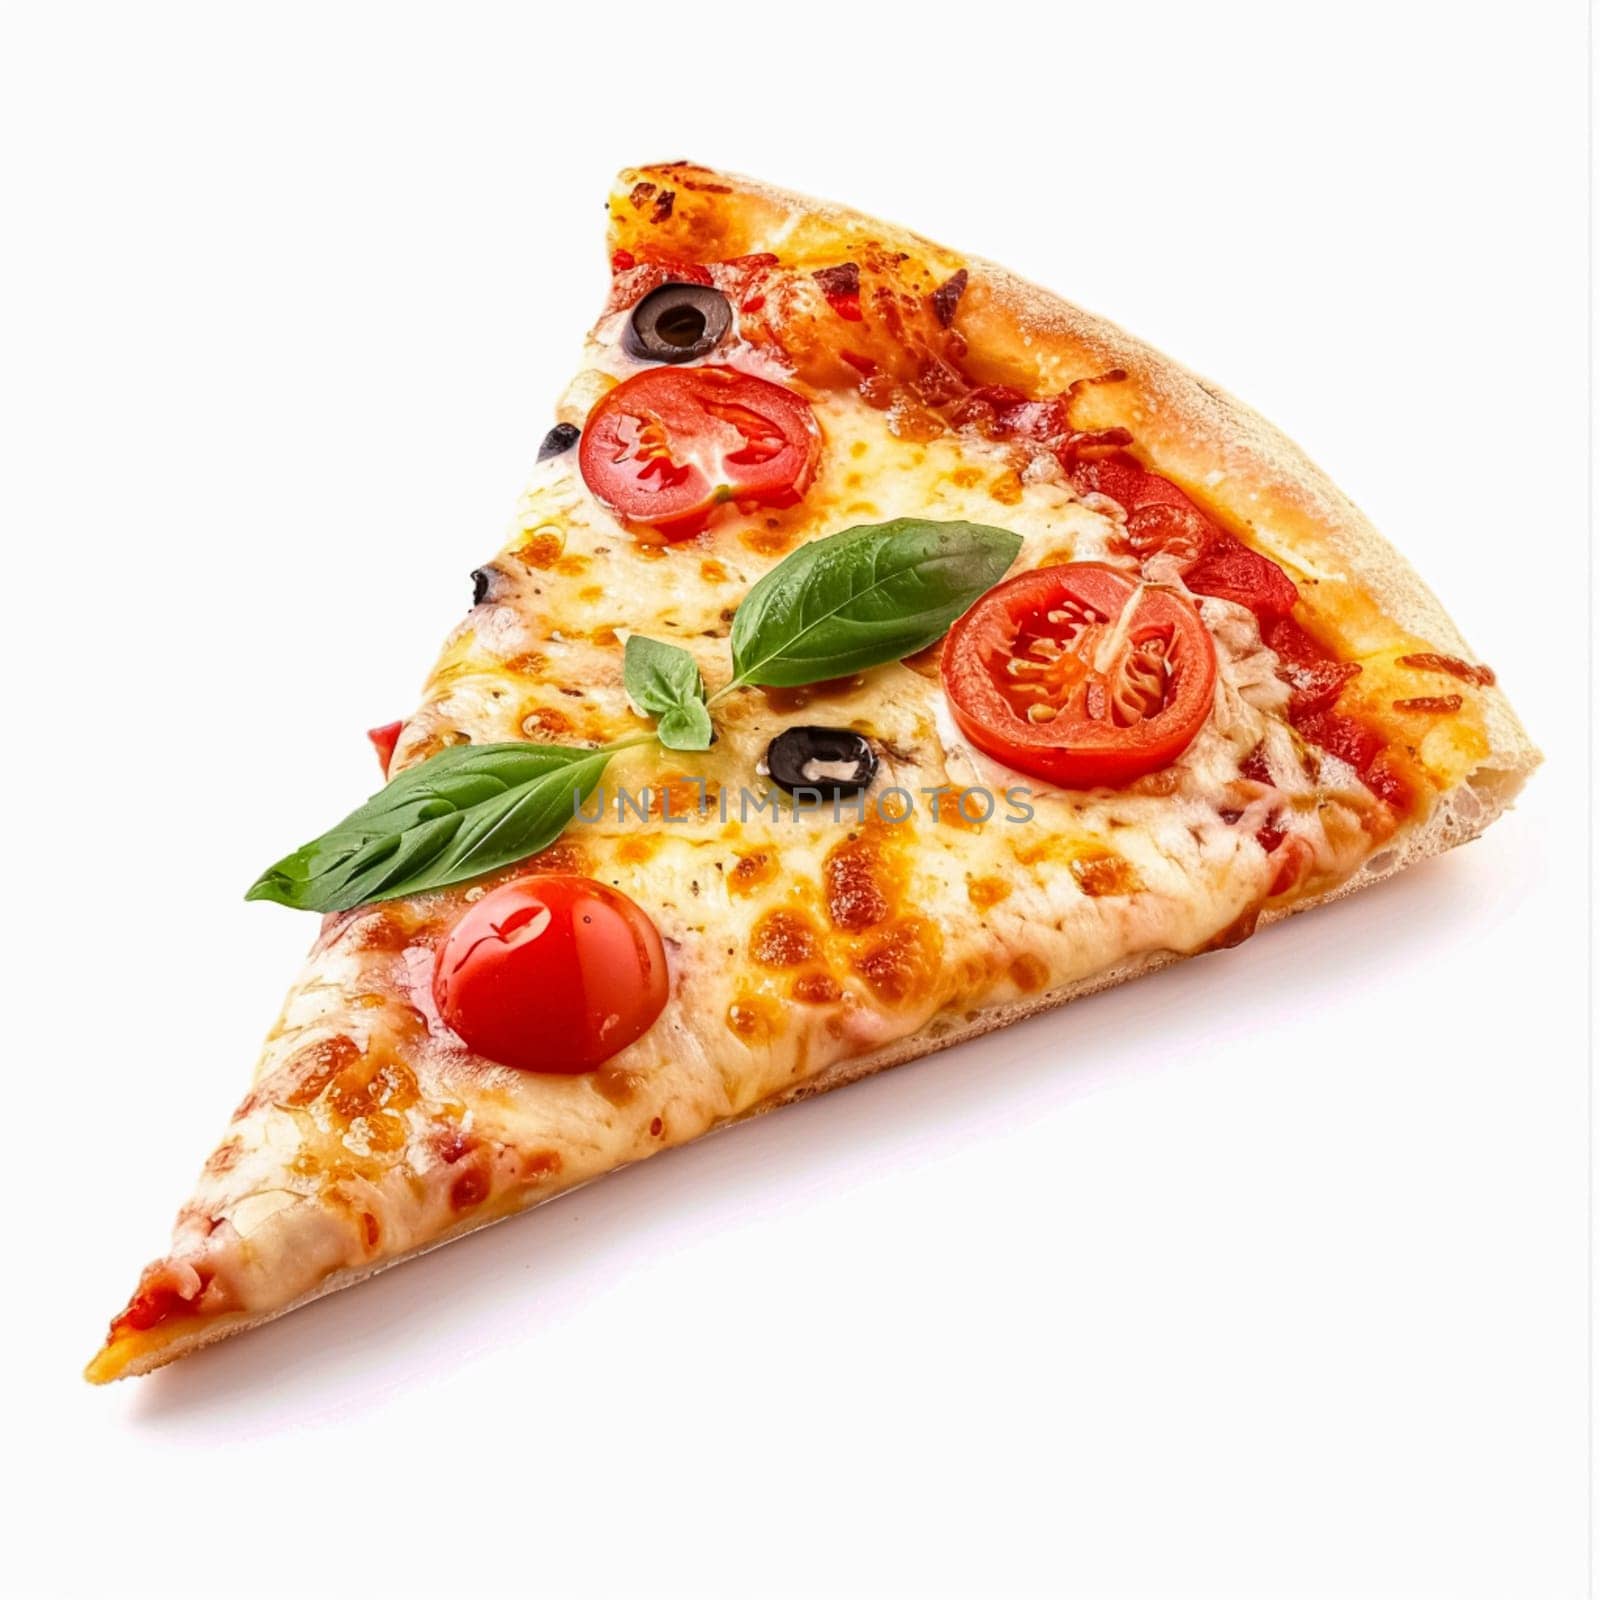 Pizza slice isolated on white background, online delivery from pizzeria, take away and fast food concept